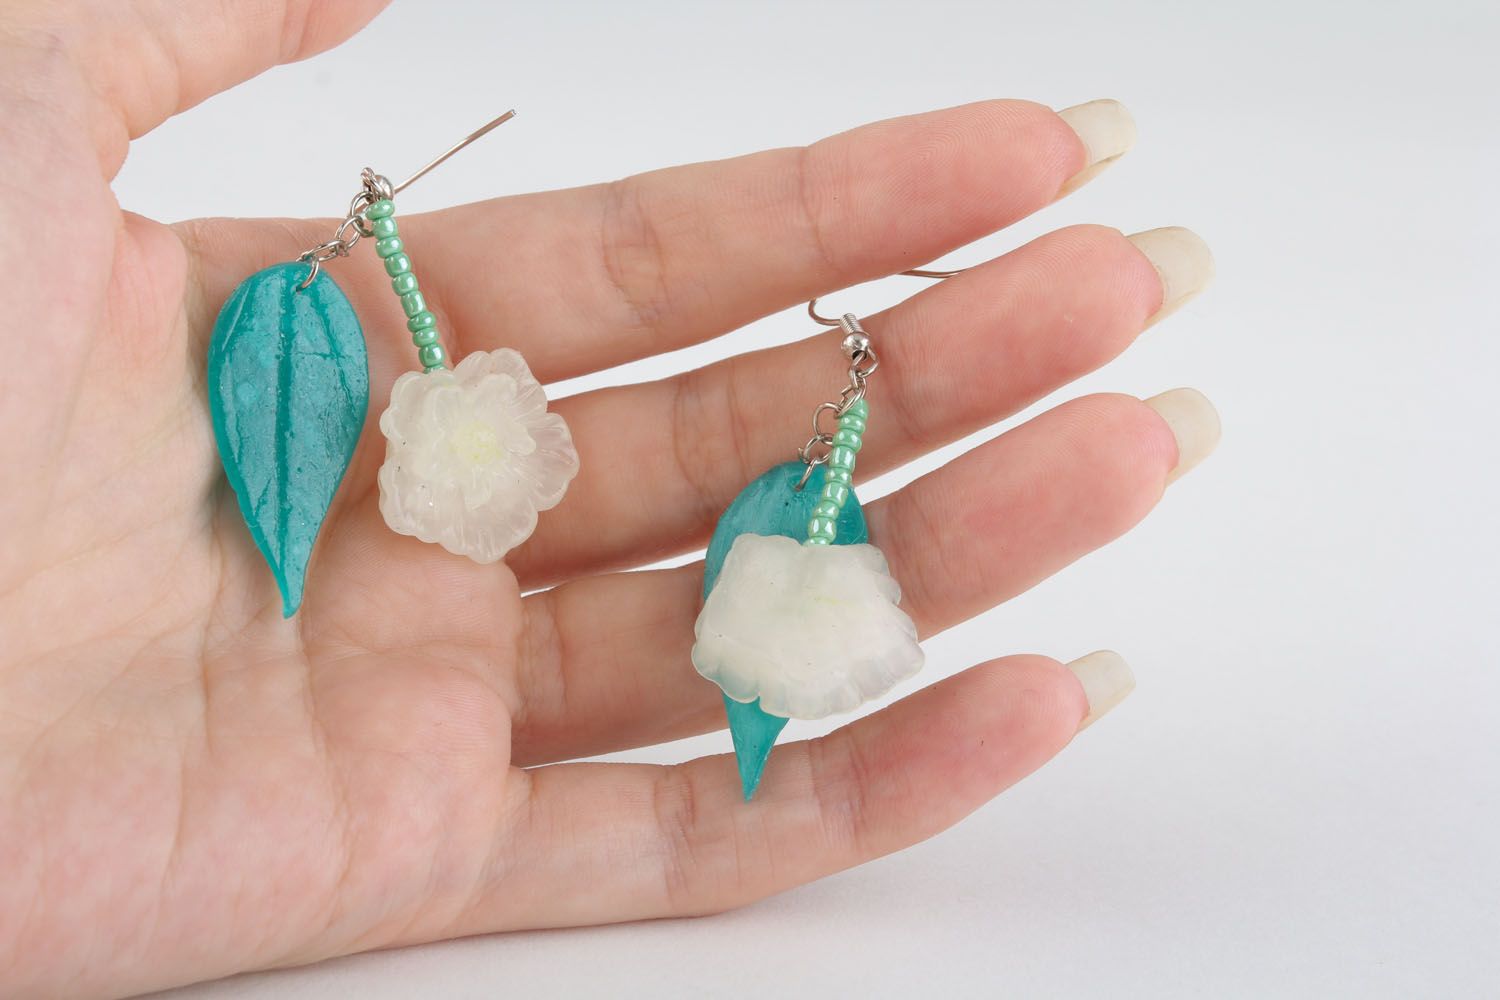 Plastic earrings with charms photo 4